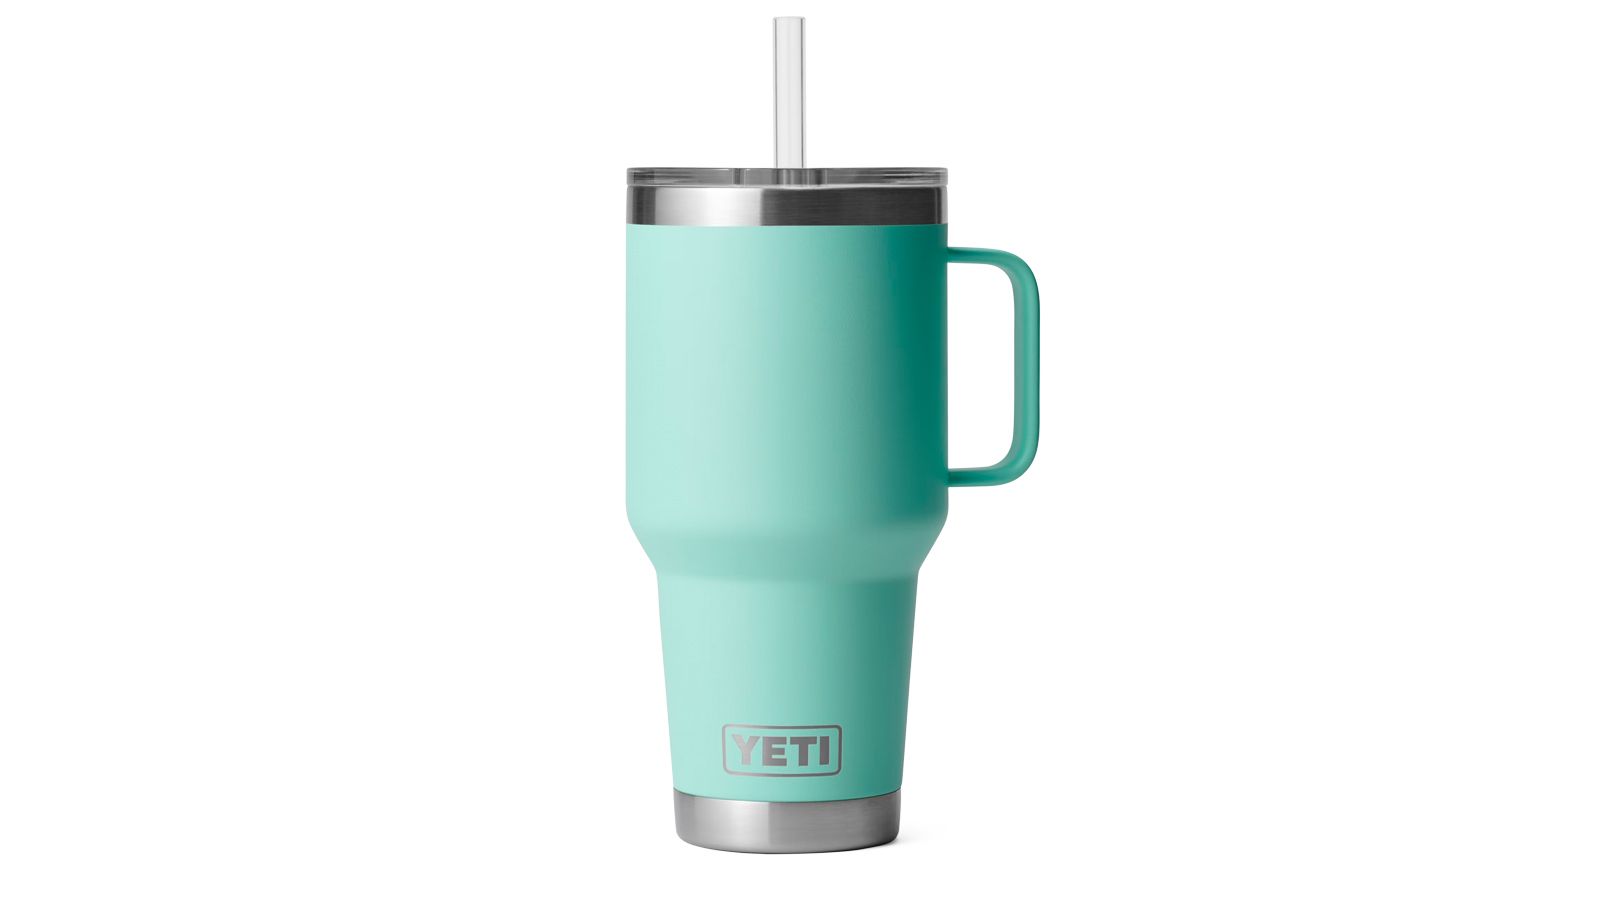 NEW! Yeti 25 oz Tumbler With Handle & Straw Lid Review I LOVE IT